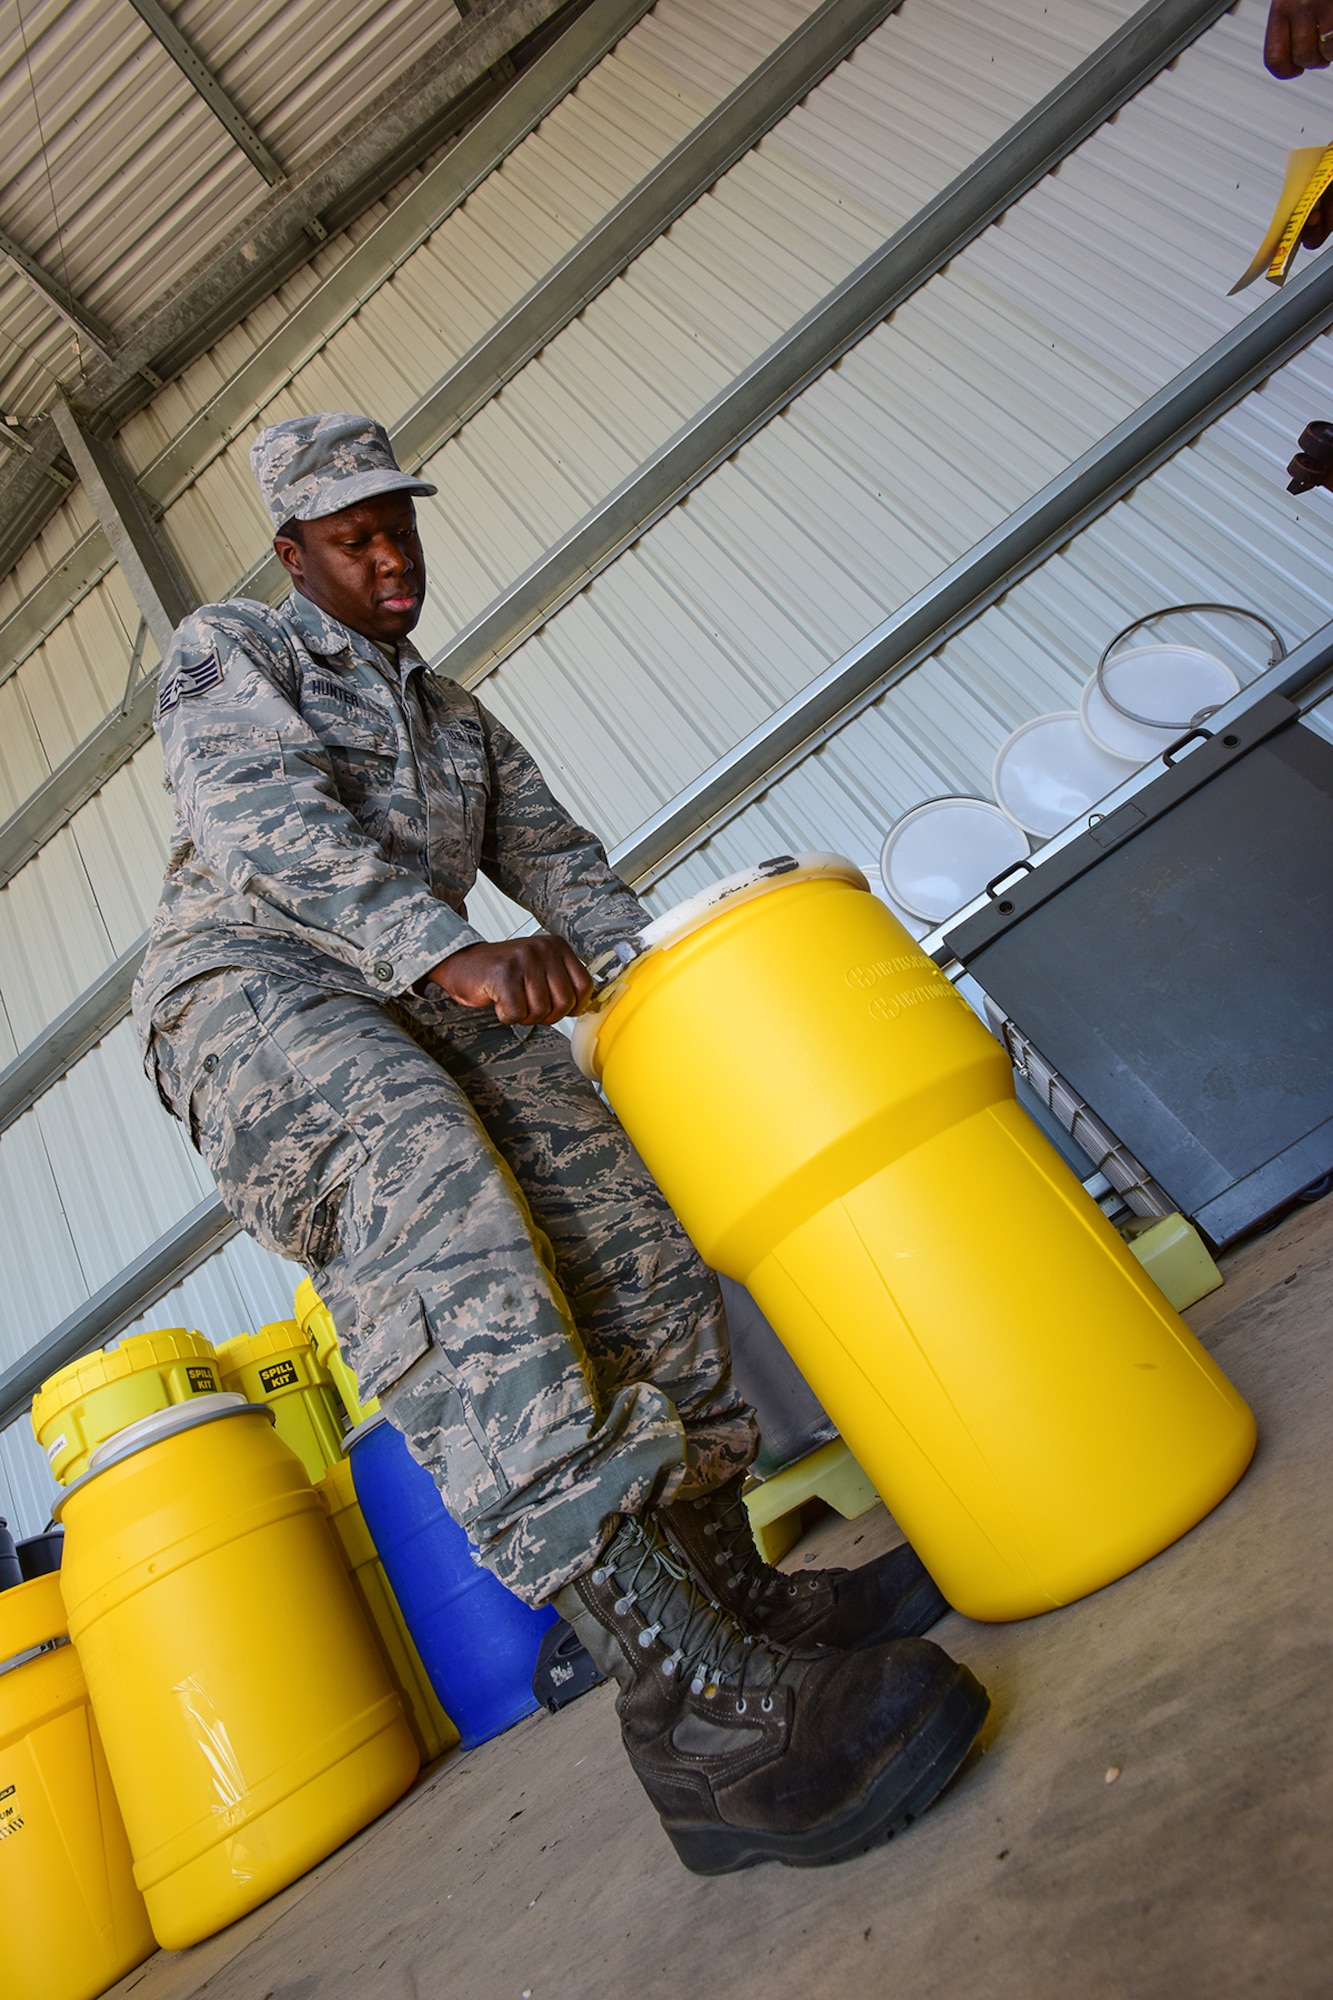 U.S. Air Force Staff Sgt. Christopher Hunter, a crew chief assigned to the 169th Aircraft Maintenance Squadron, drops off materials for disposal at the Central Acquisition Point drop-off center at McEntire Joint National Guard Base, S.C., Nov. 16, 2017. This is one of the programs that the 169th Fighter Wing at McEntire offers in order to assist in keeping the community clean by recycling excess materials. (U.S. Air National Guard photo by Senior Airman Megan Floyd)